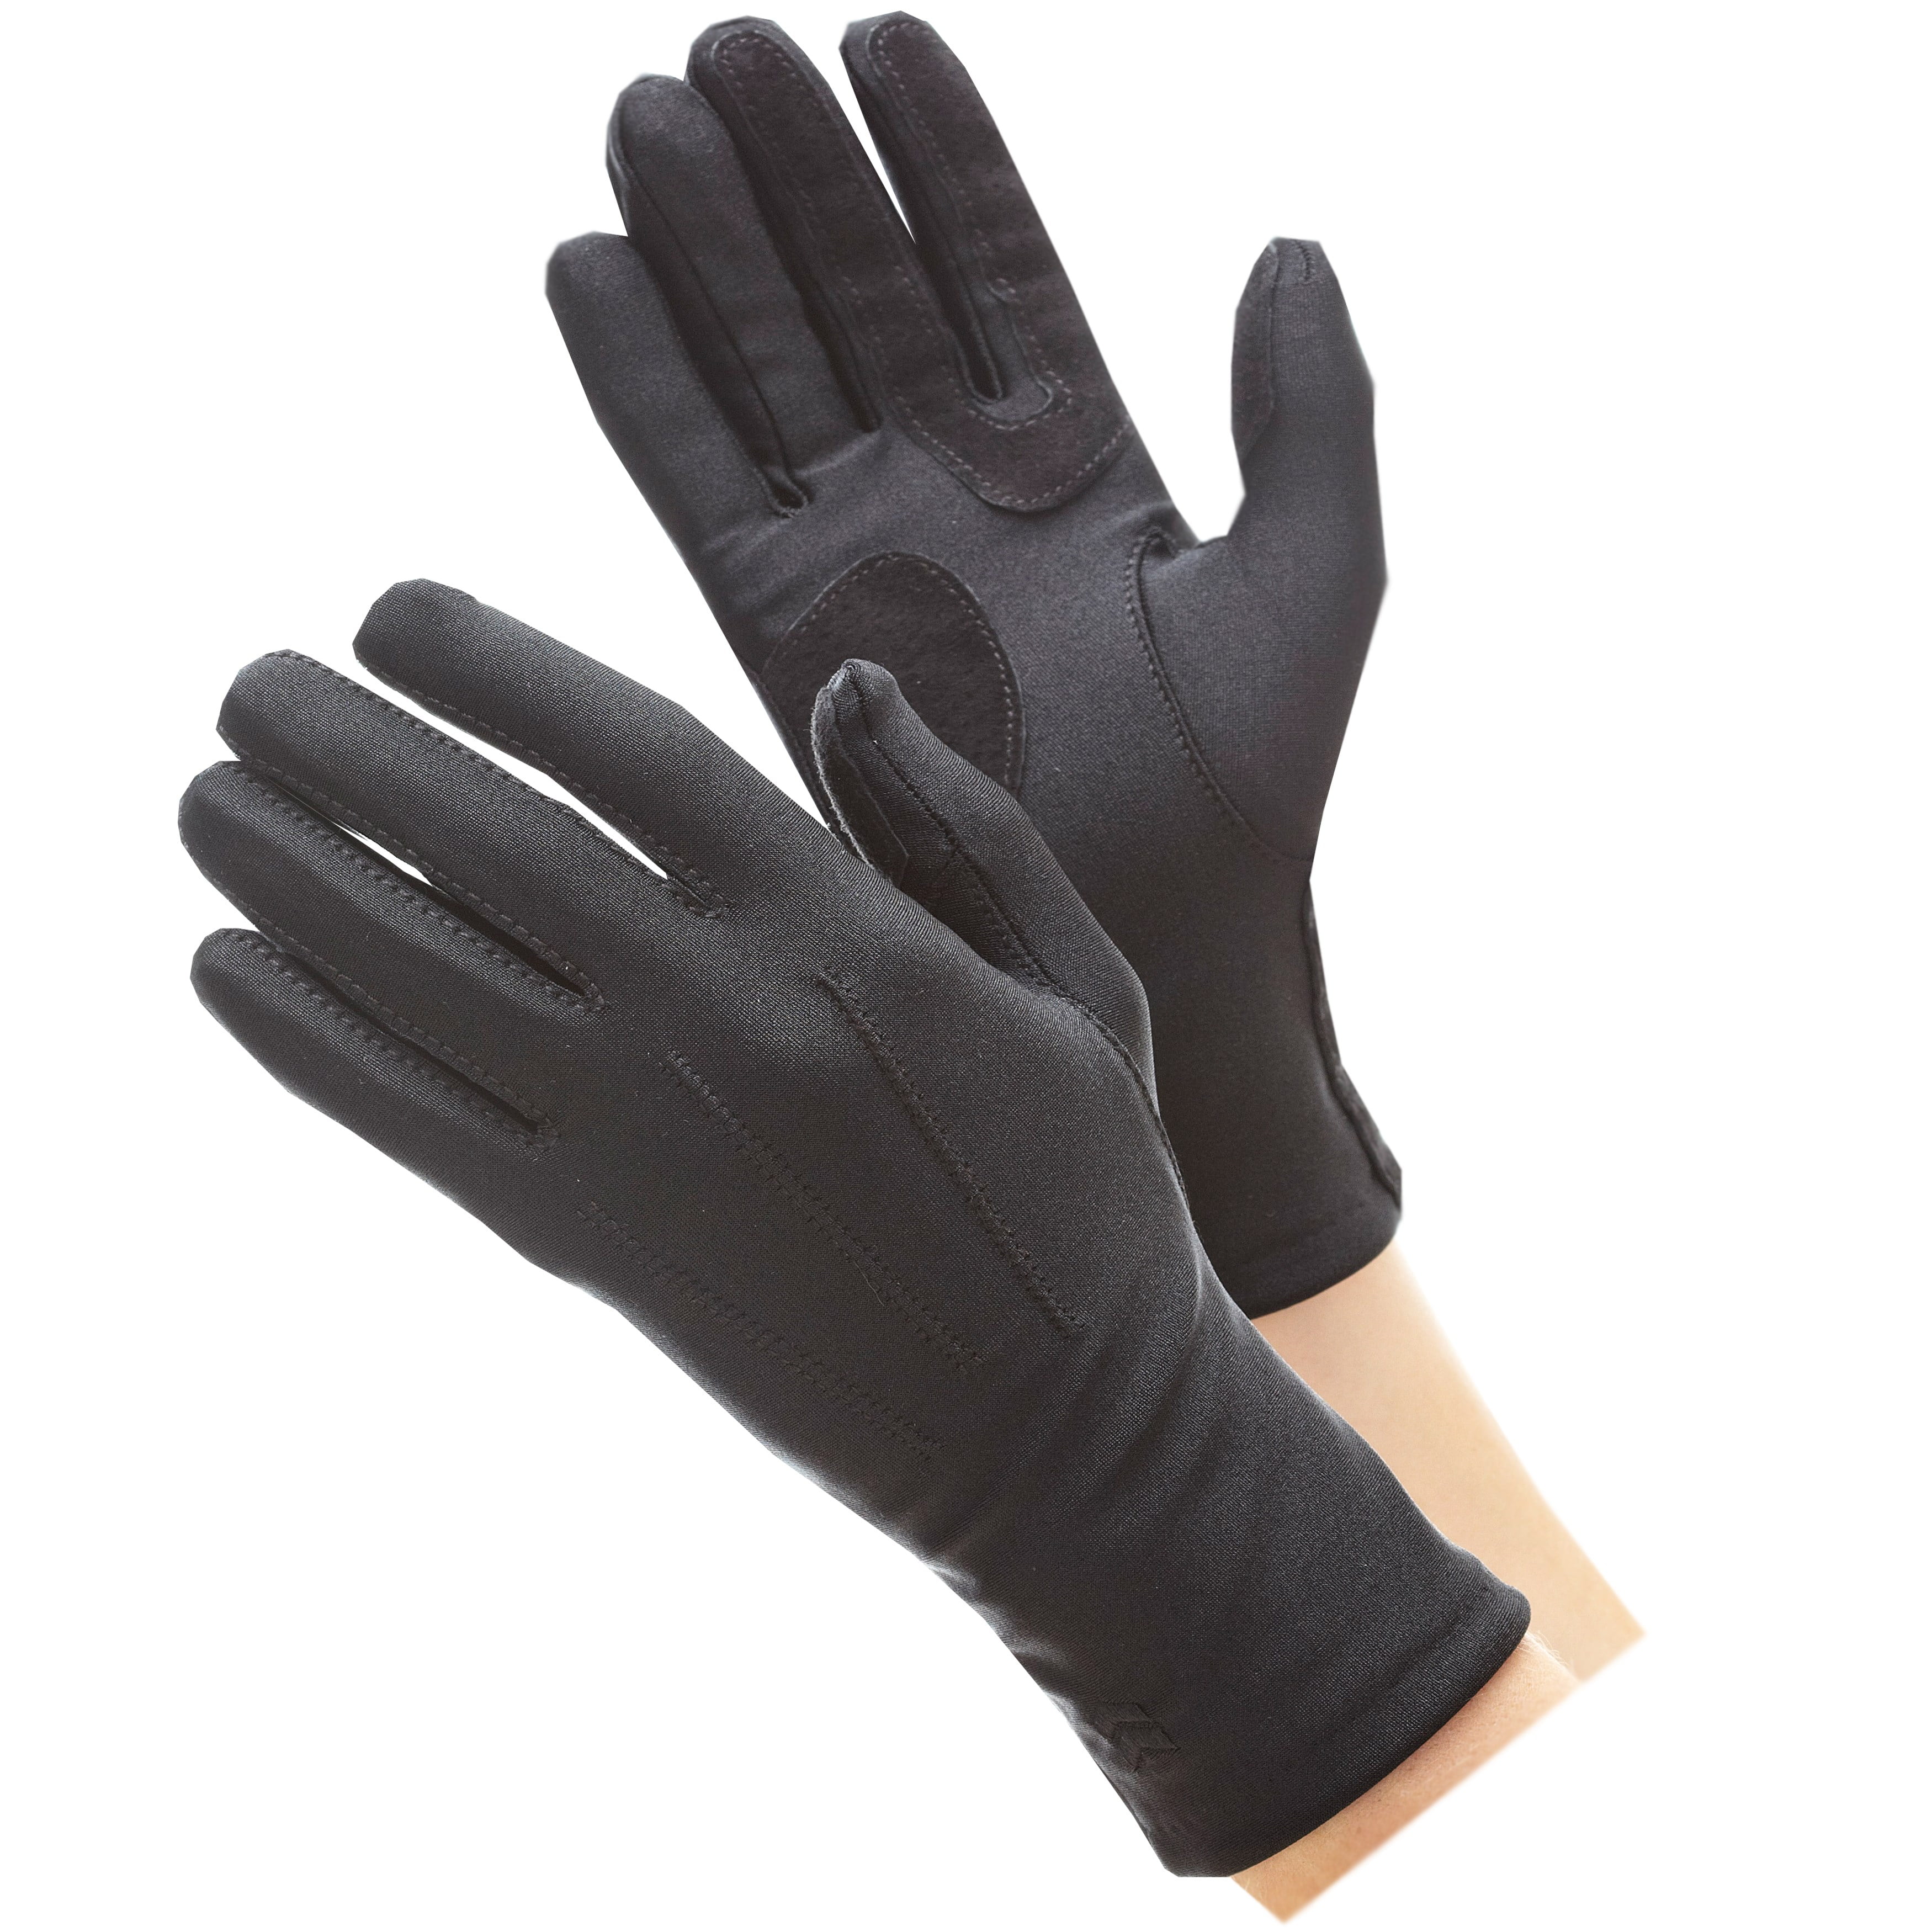 isotoner Mens Black Leather Insulated Winter Driving Gloves L BHFO 9511 for sale online 